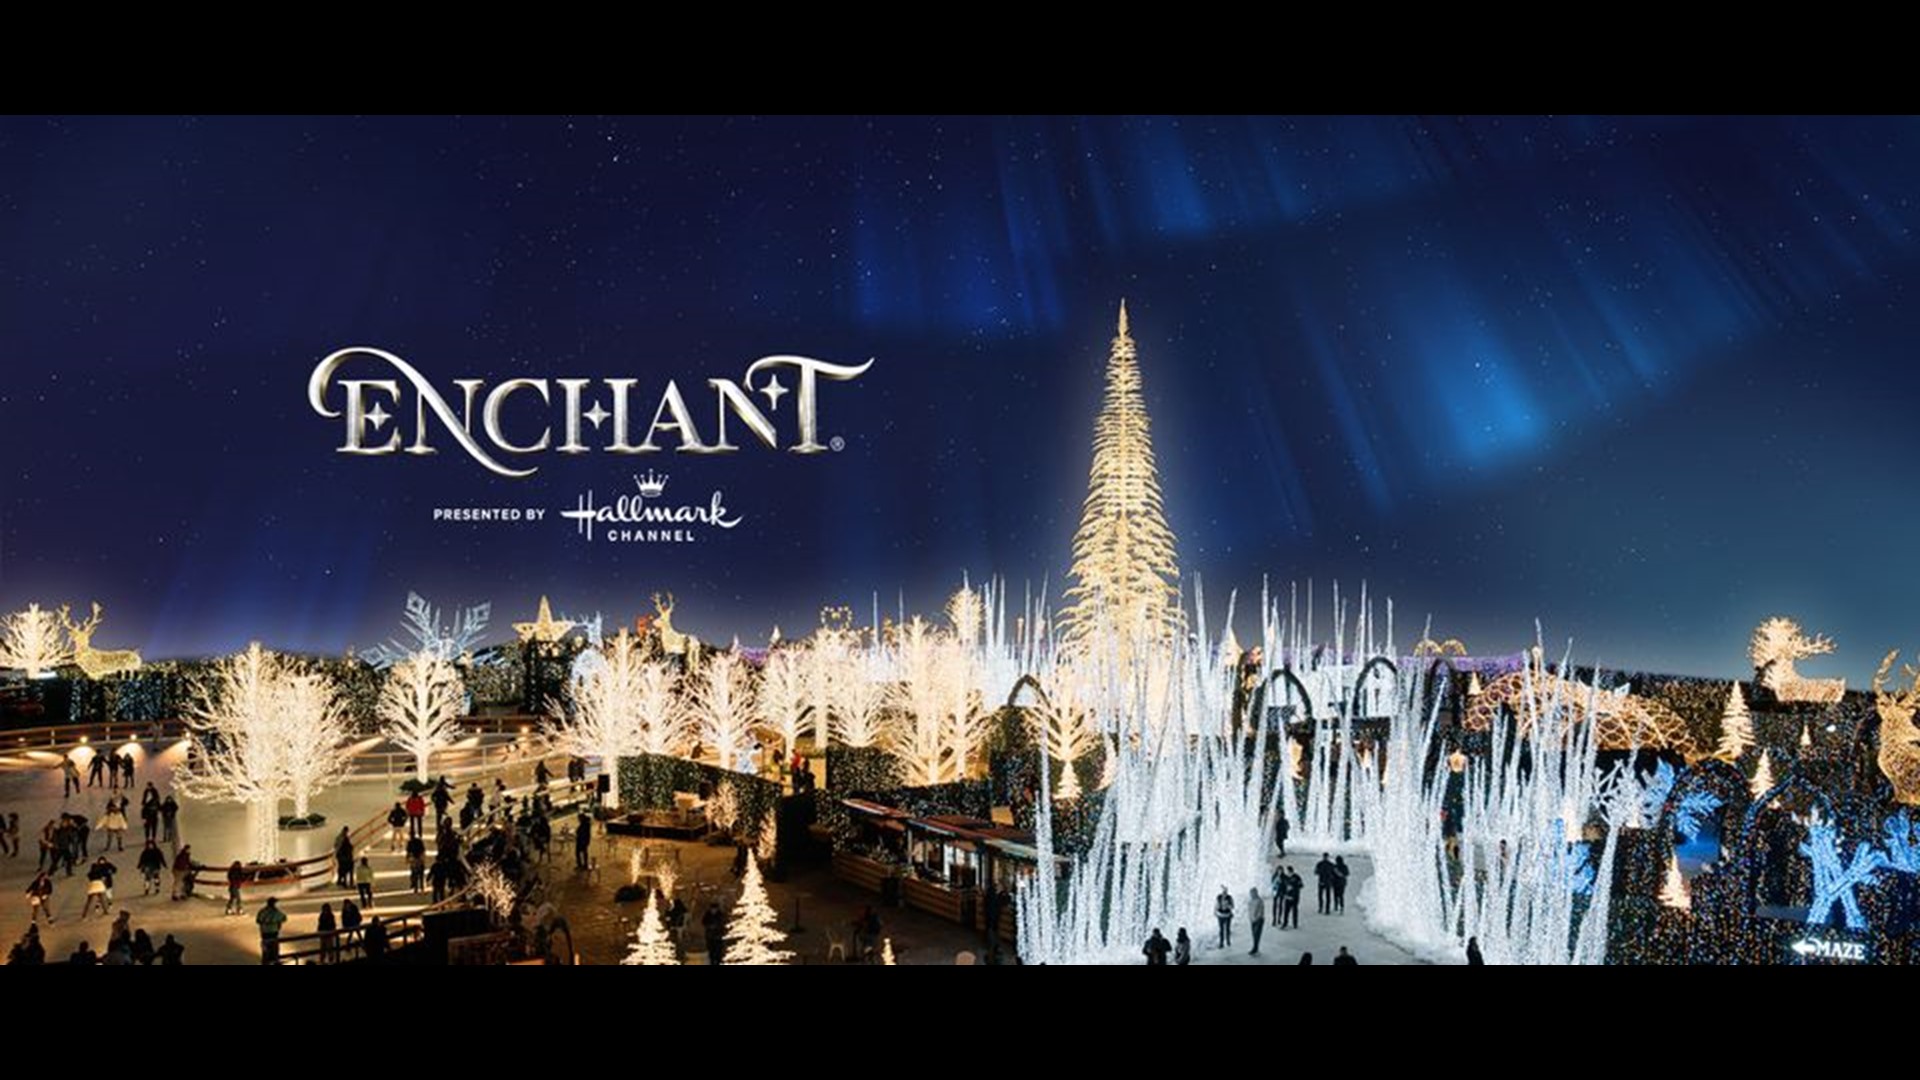 Watch GDL for your chance to win 4 tickets to “Enchant Christmas